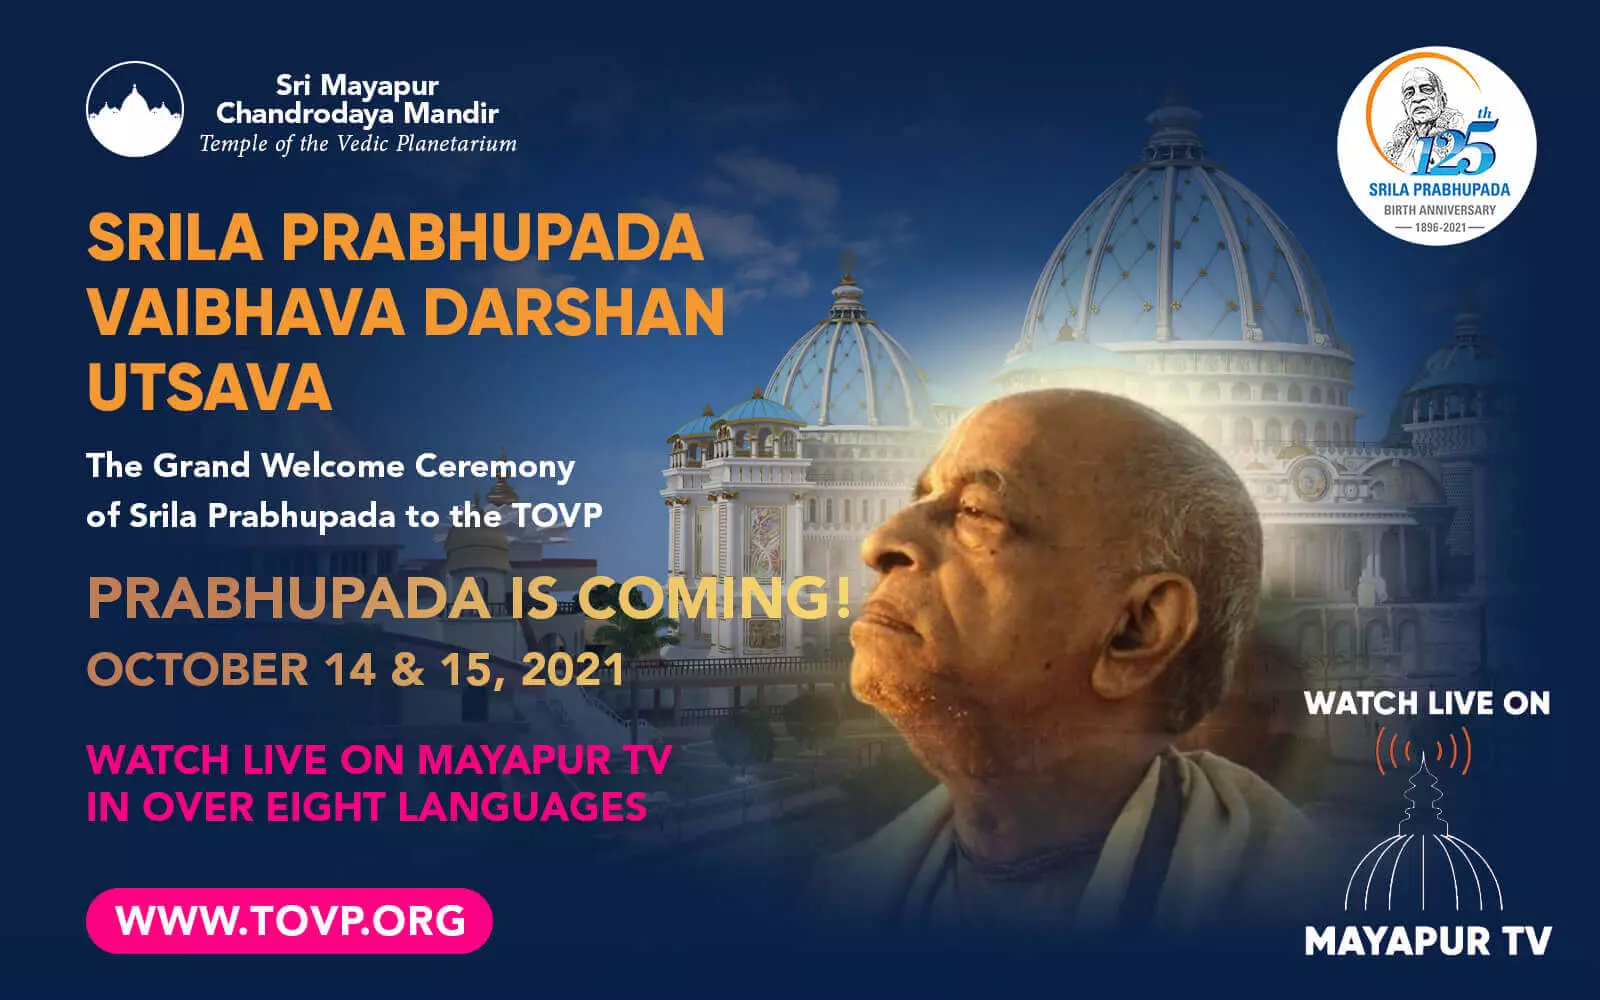 PRABHUPADA IS COMING TO THE TOVP! Watch Live on Mayapur TV, October 14 and 15